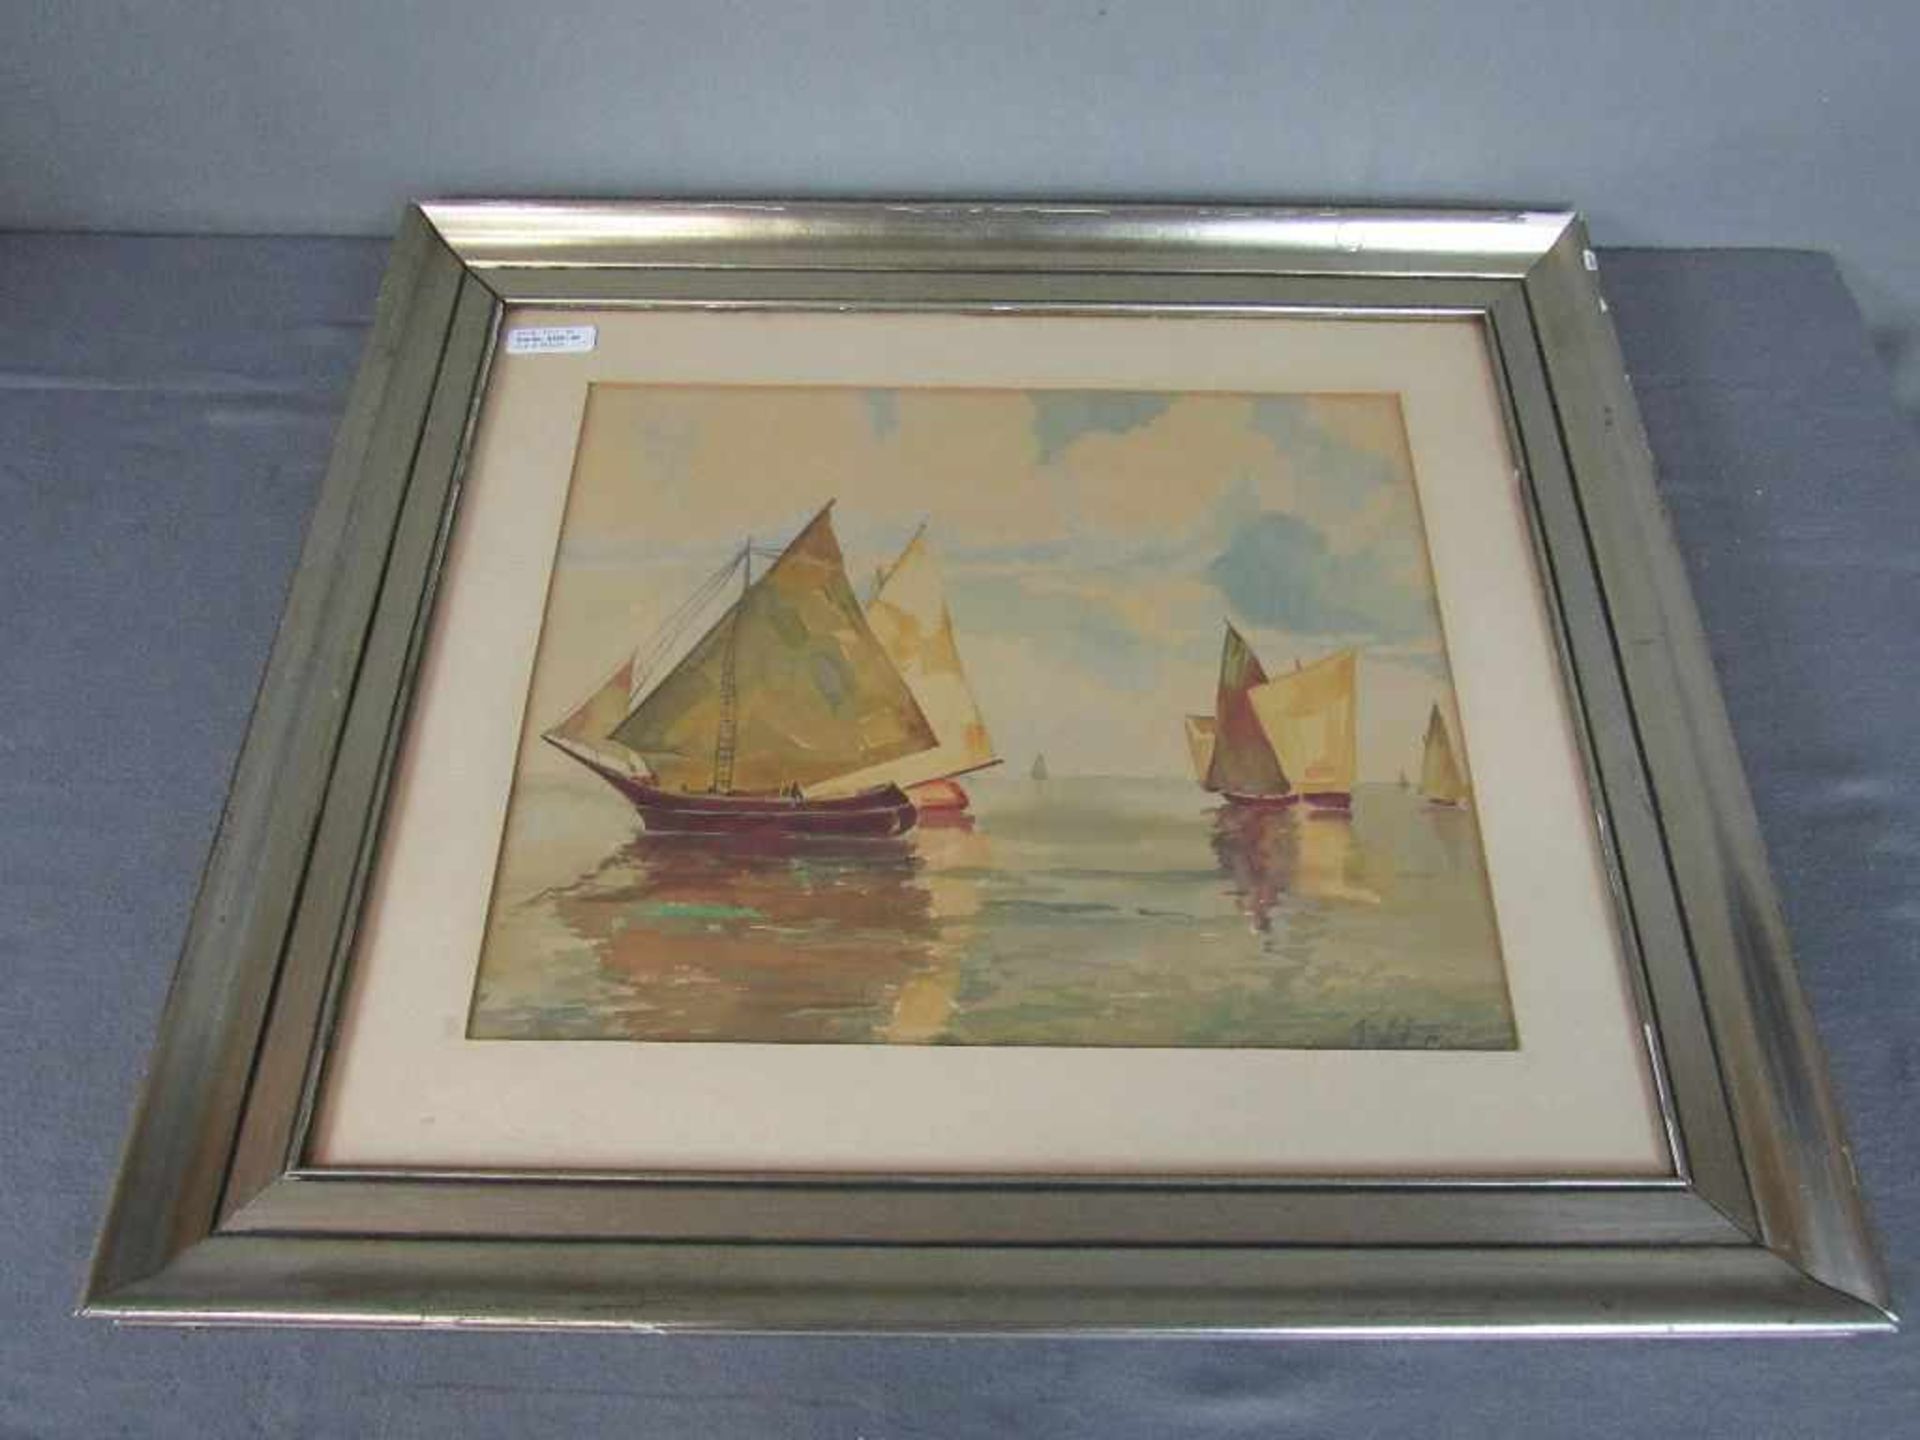 Aquarell Hoffmann Theo Segelboote bei ruhiger See Maß:61x71cm- - -20.00 % buyer's premium on the - Image 2 of 4